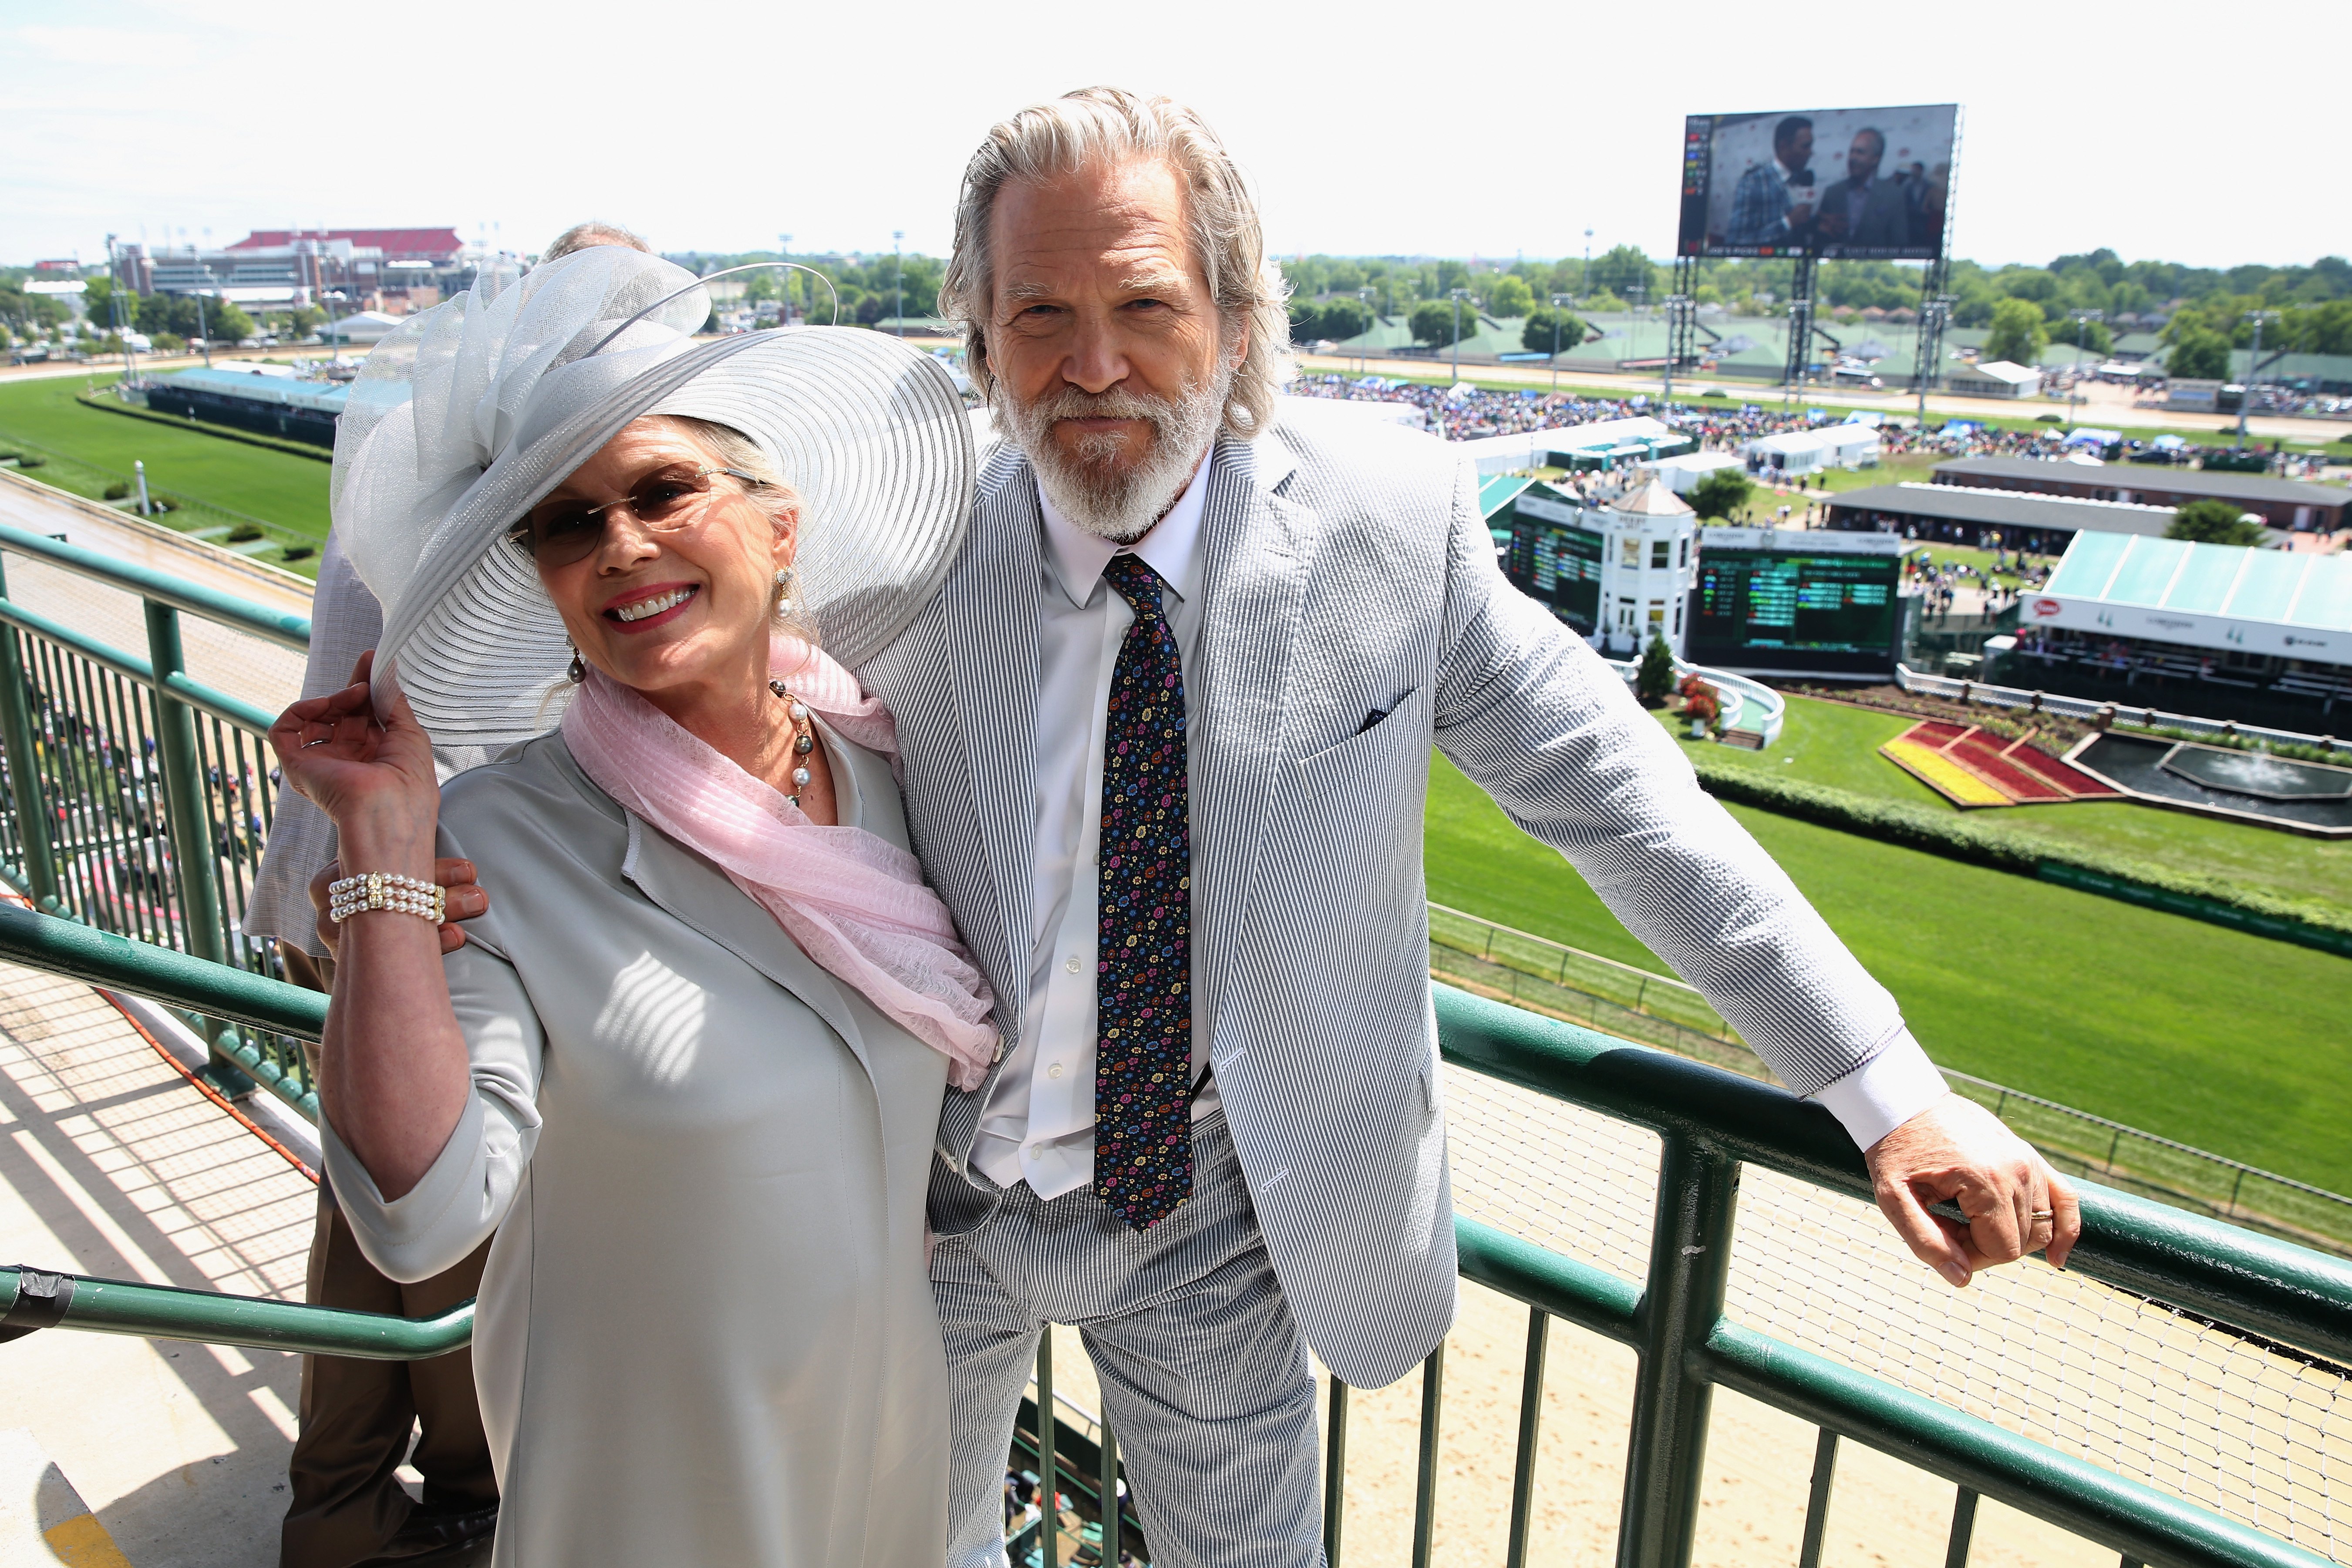 Susan Geston and Jeff Bridges, Star Of The Upcoming "Kingsman: The Golden Circle" attends The Kentucky Derby at Churchill Downs on May 6, 2017 in Louisville, Kentucky. | Source: Getty Images